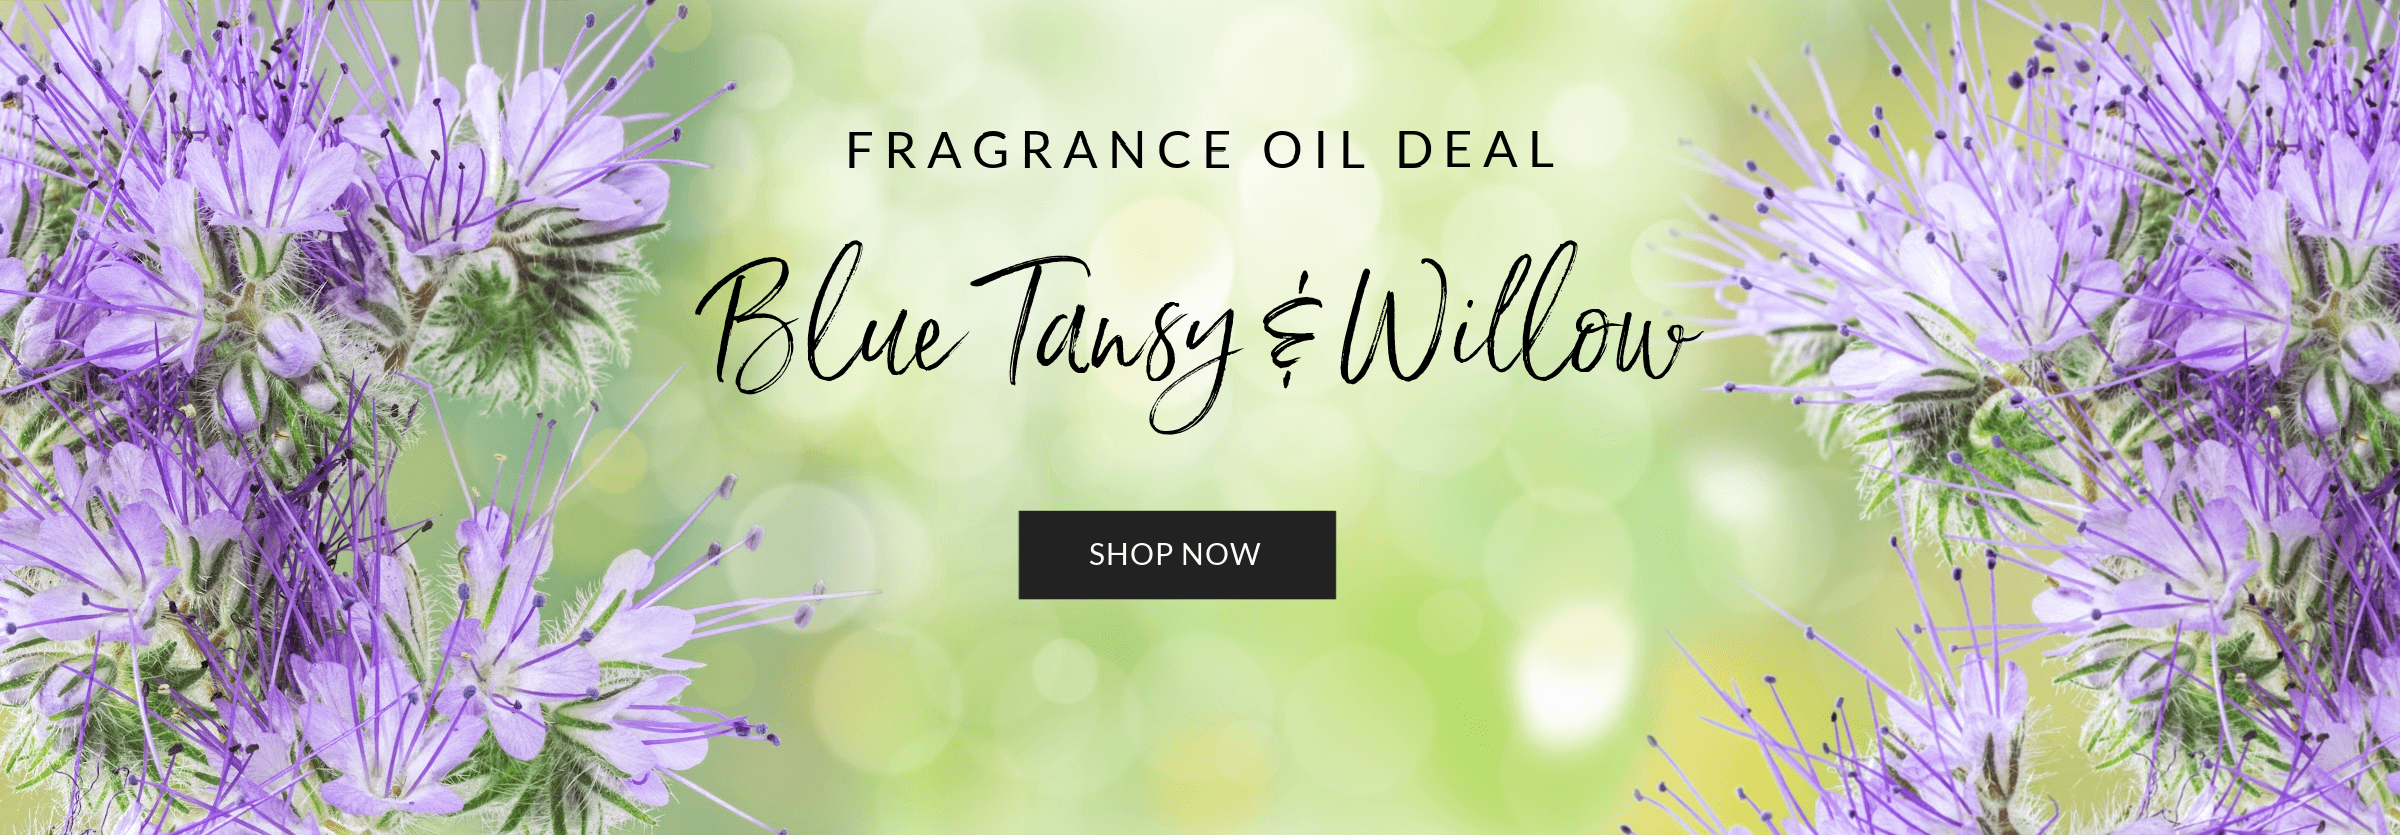 Blue Tansy and Willow Fragrance Oil Deal